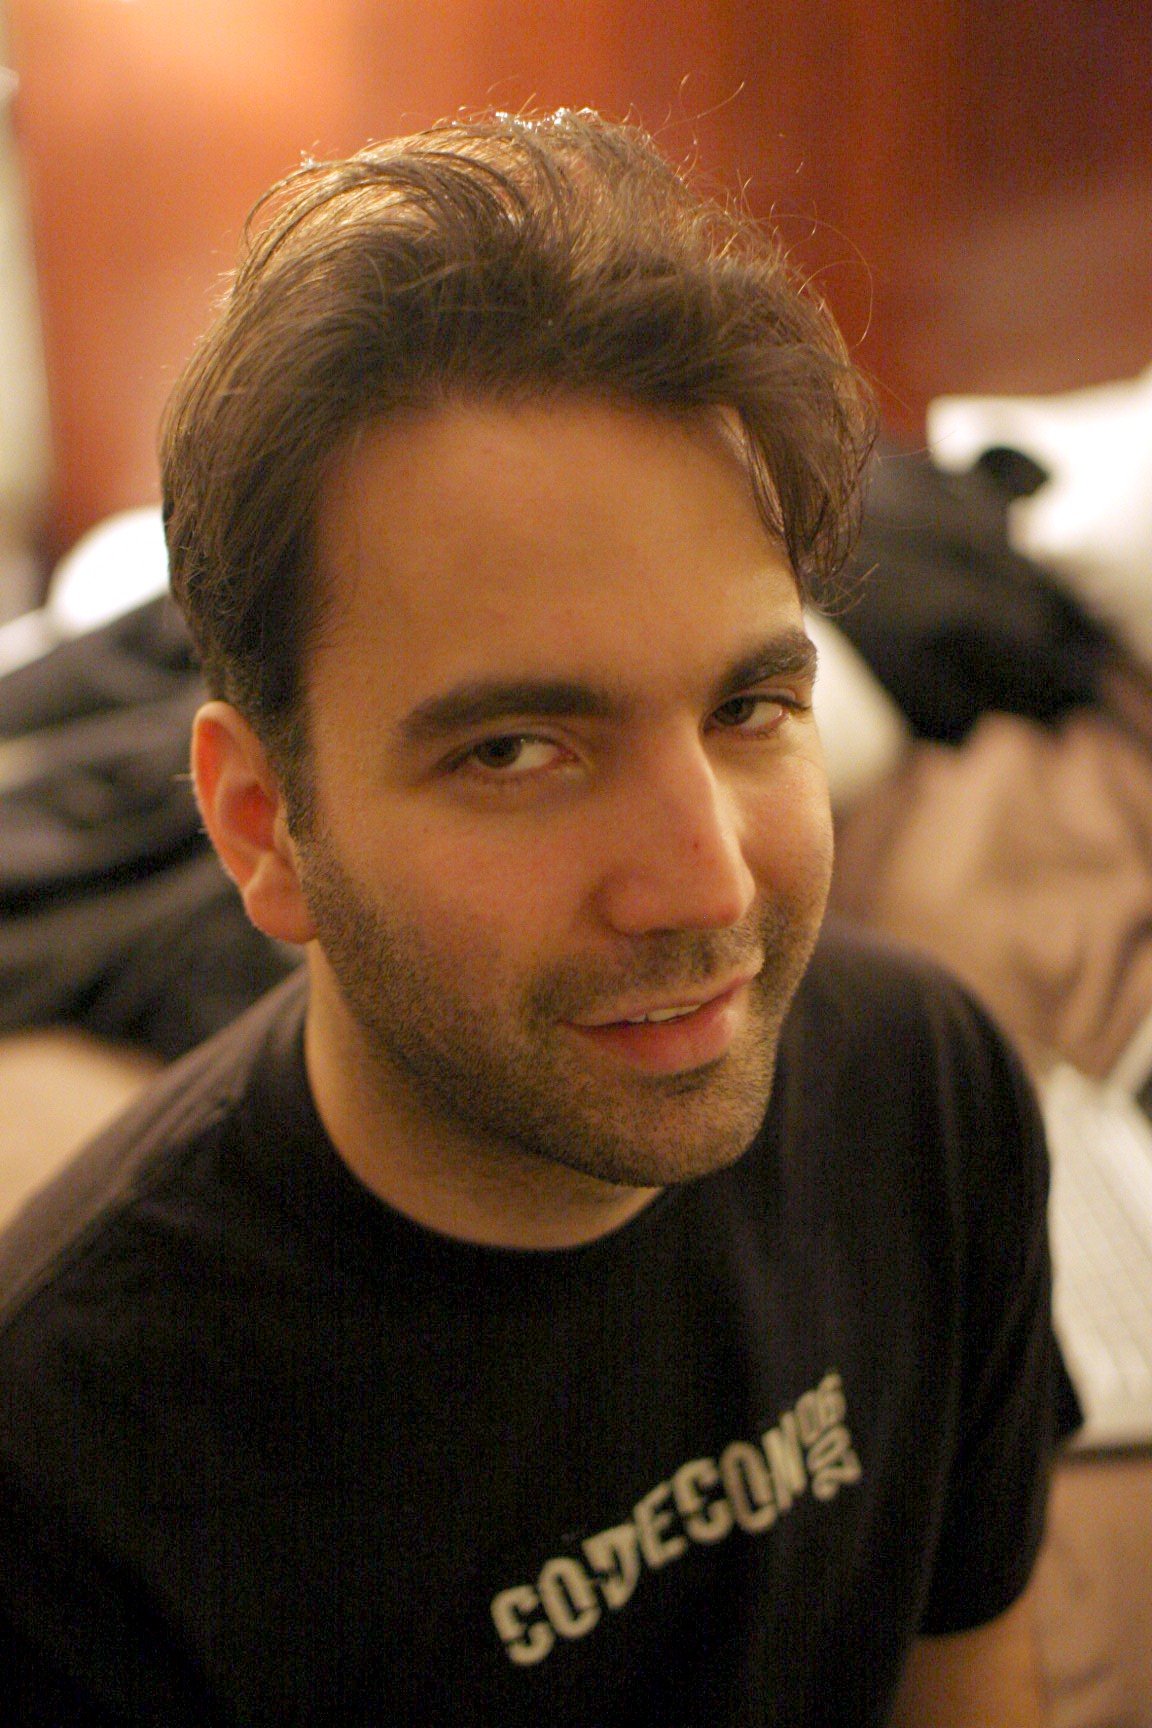 Bram Cohen, CEO and Founder of BitTorrent